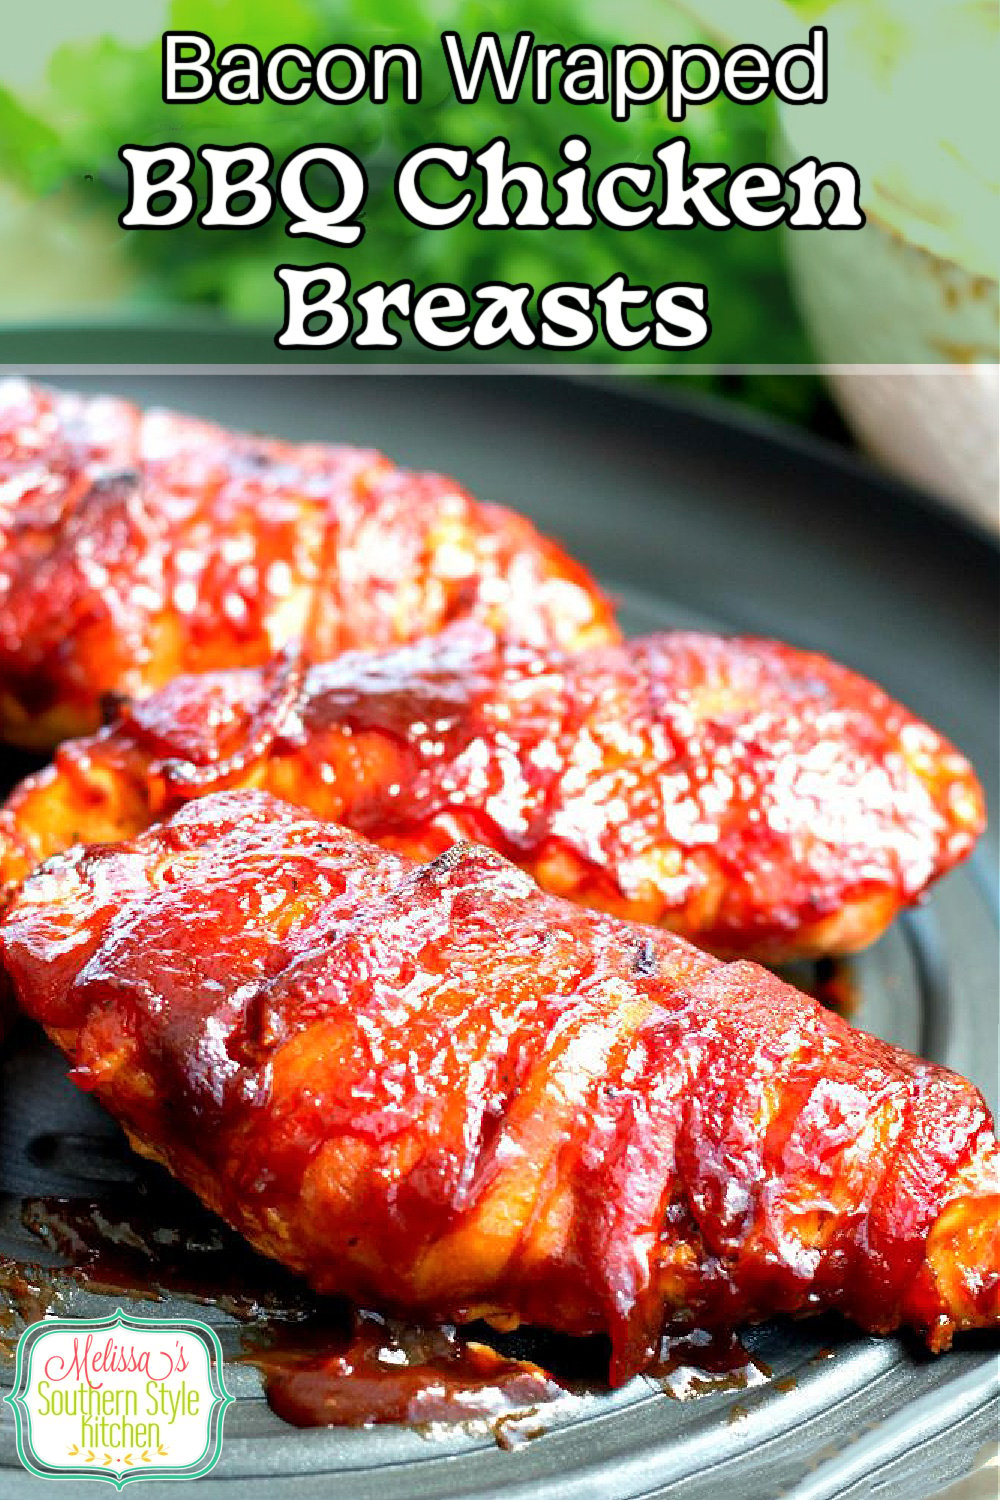 4-Ingredient Bacon Wrapped Barbecue Chicken Breasts are a cinch to make #chicken #barbecue #bbqchicken #easychickenbreastrecipes #bacon #baconwrappedchicken #dinnerideas #dinnerrecipes #southernrecipes via @melissasssk